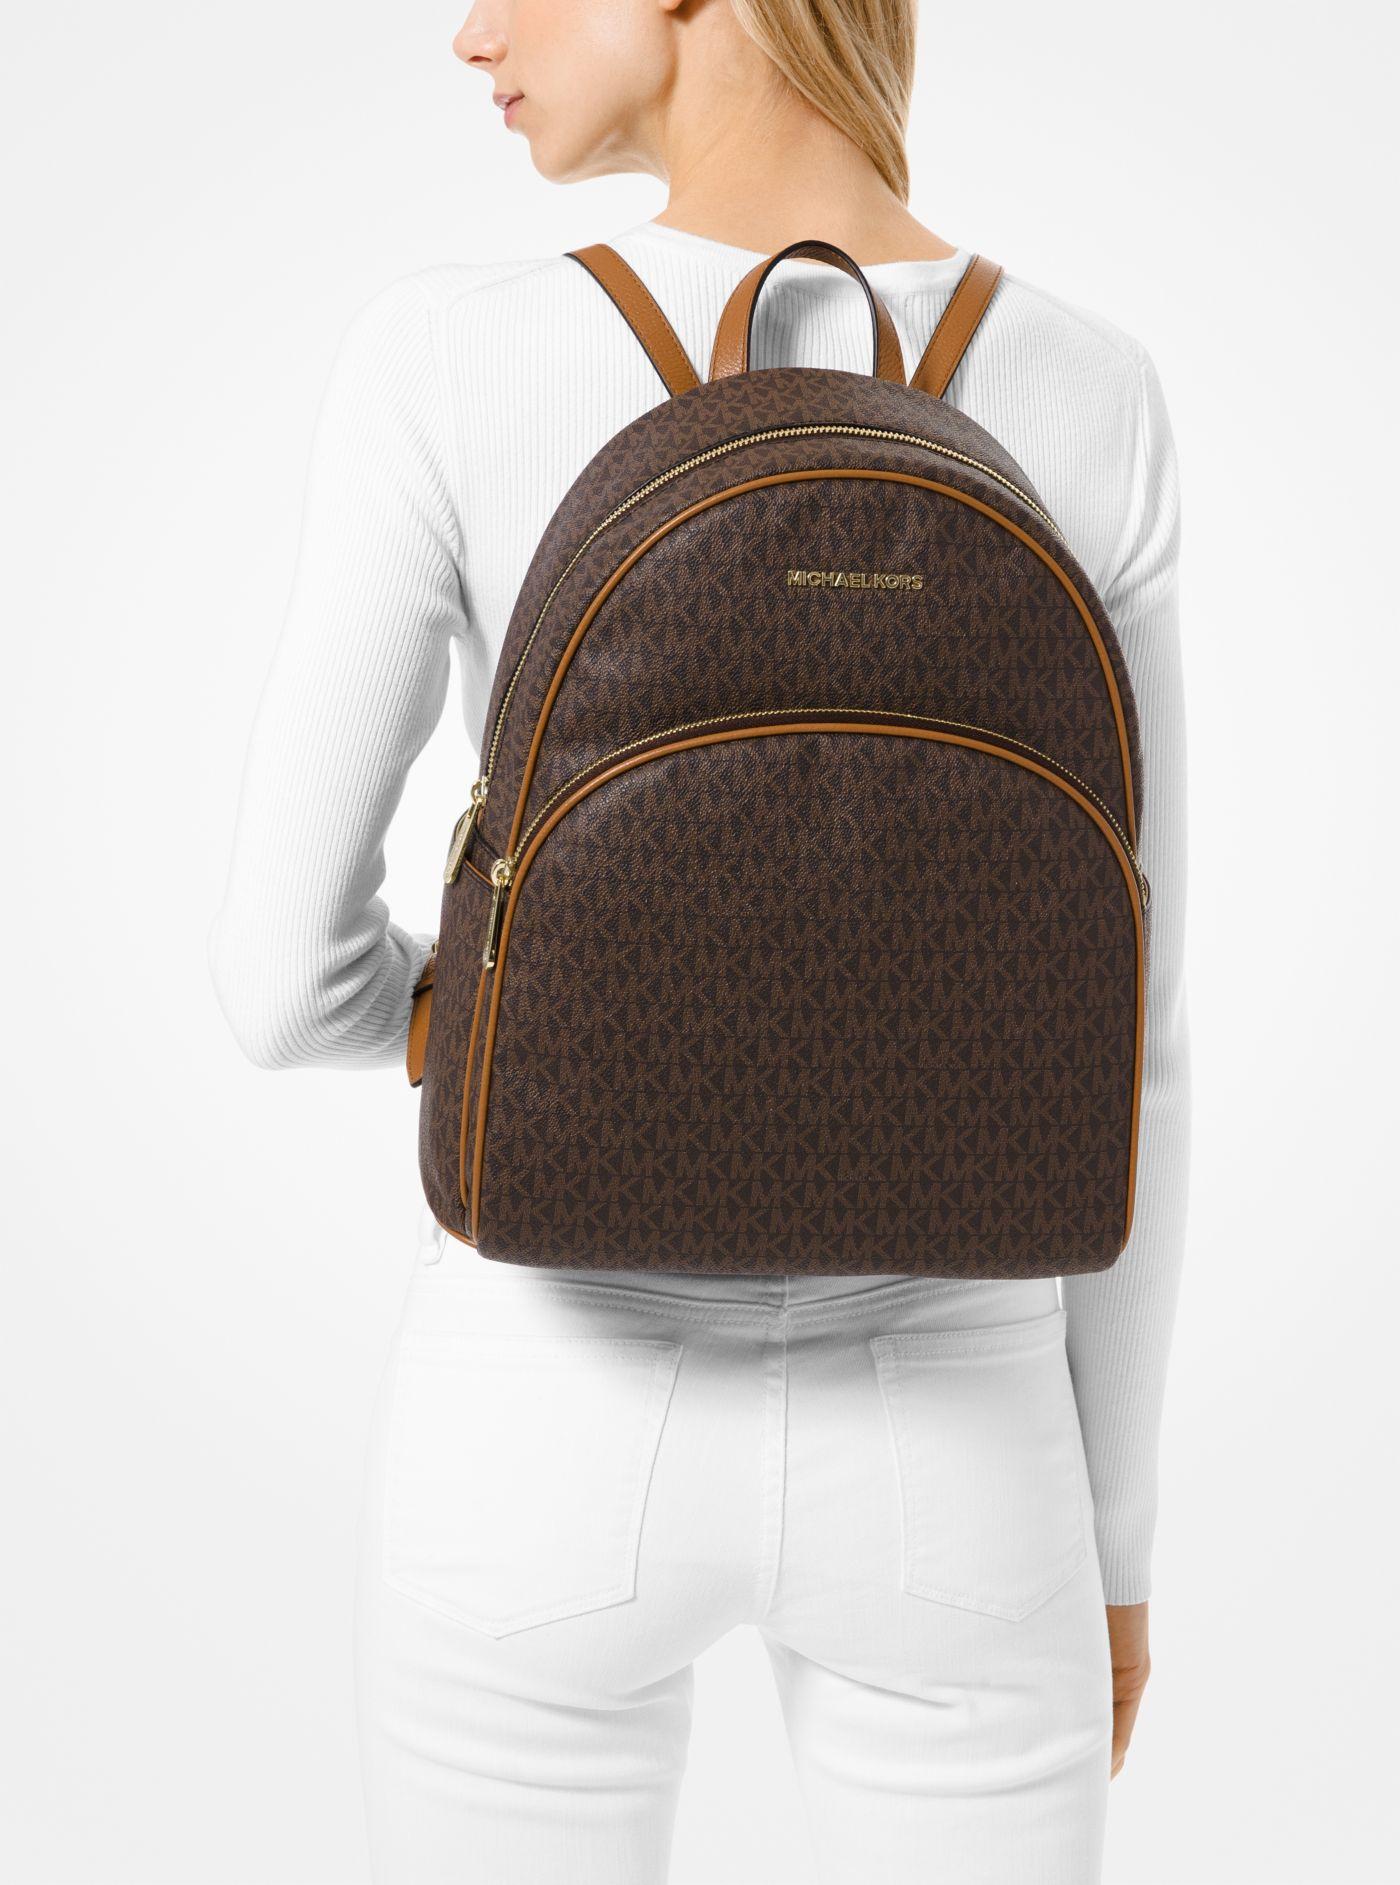 michael kors abbey large backpack brown